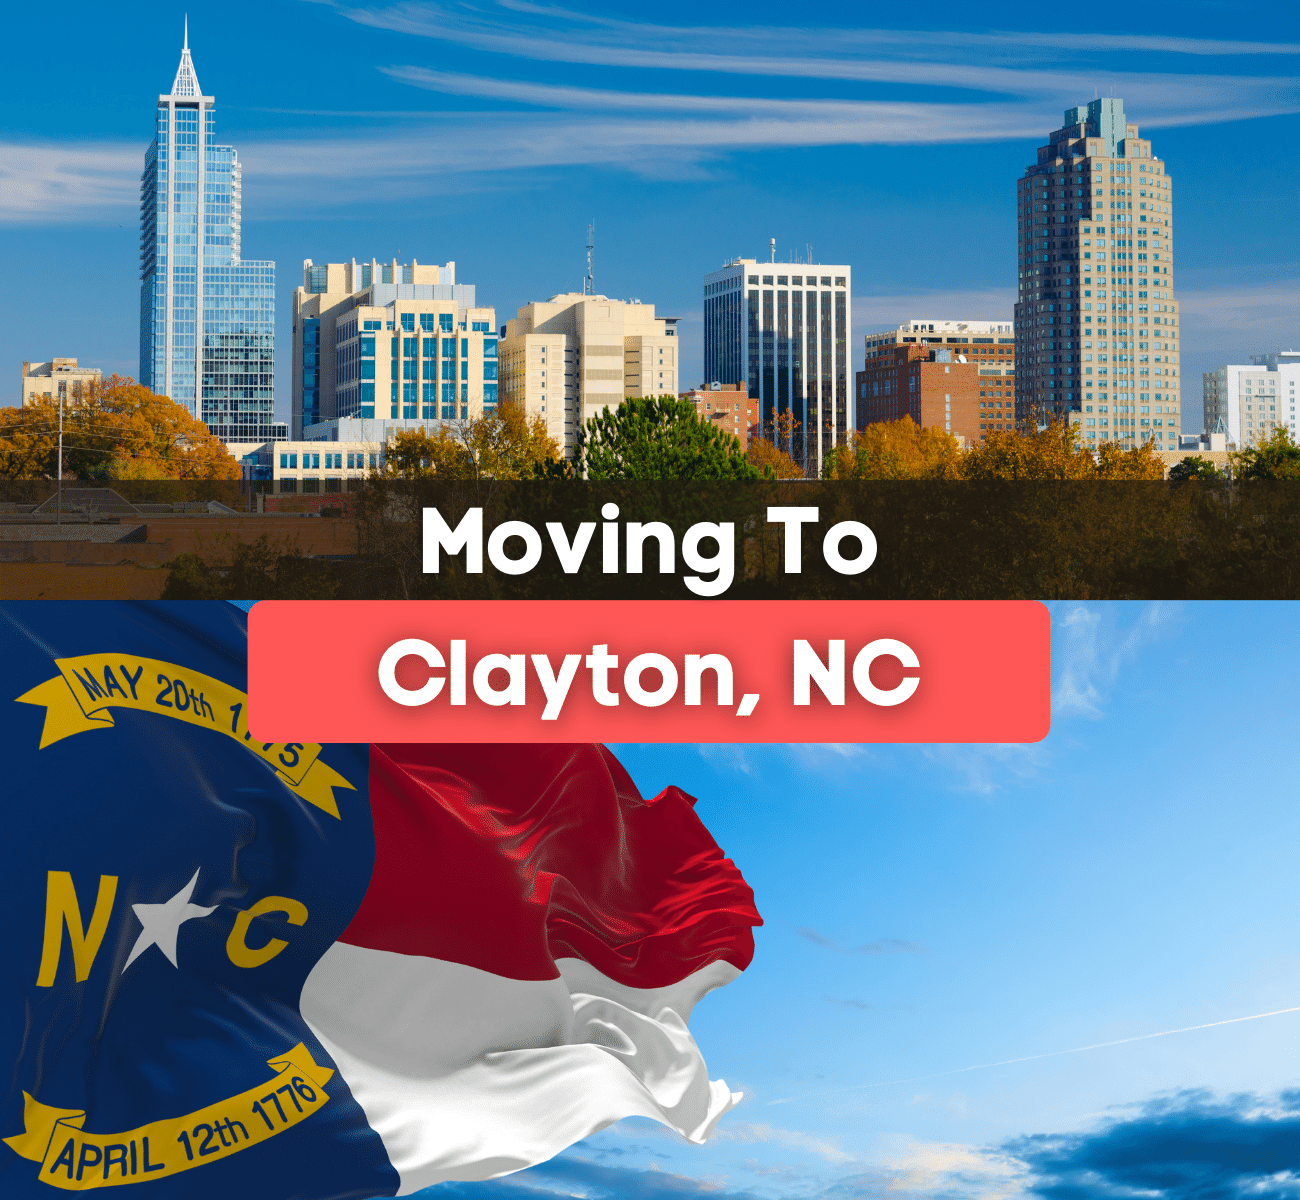 Moving to Clayton NC - What is it like living in Clayton?